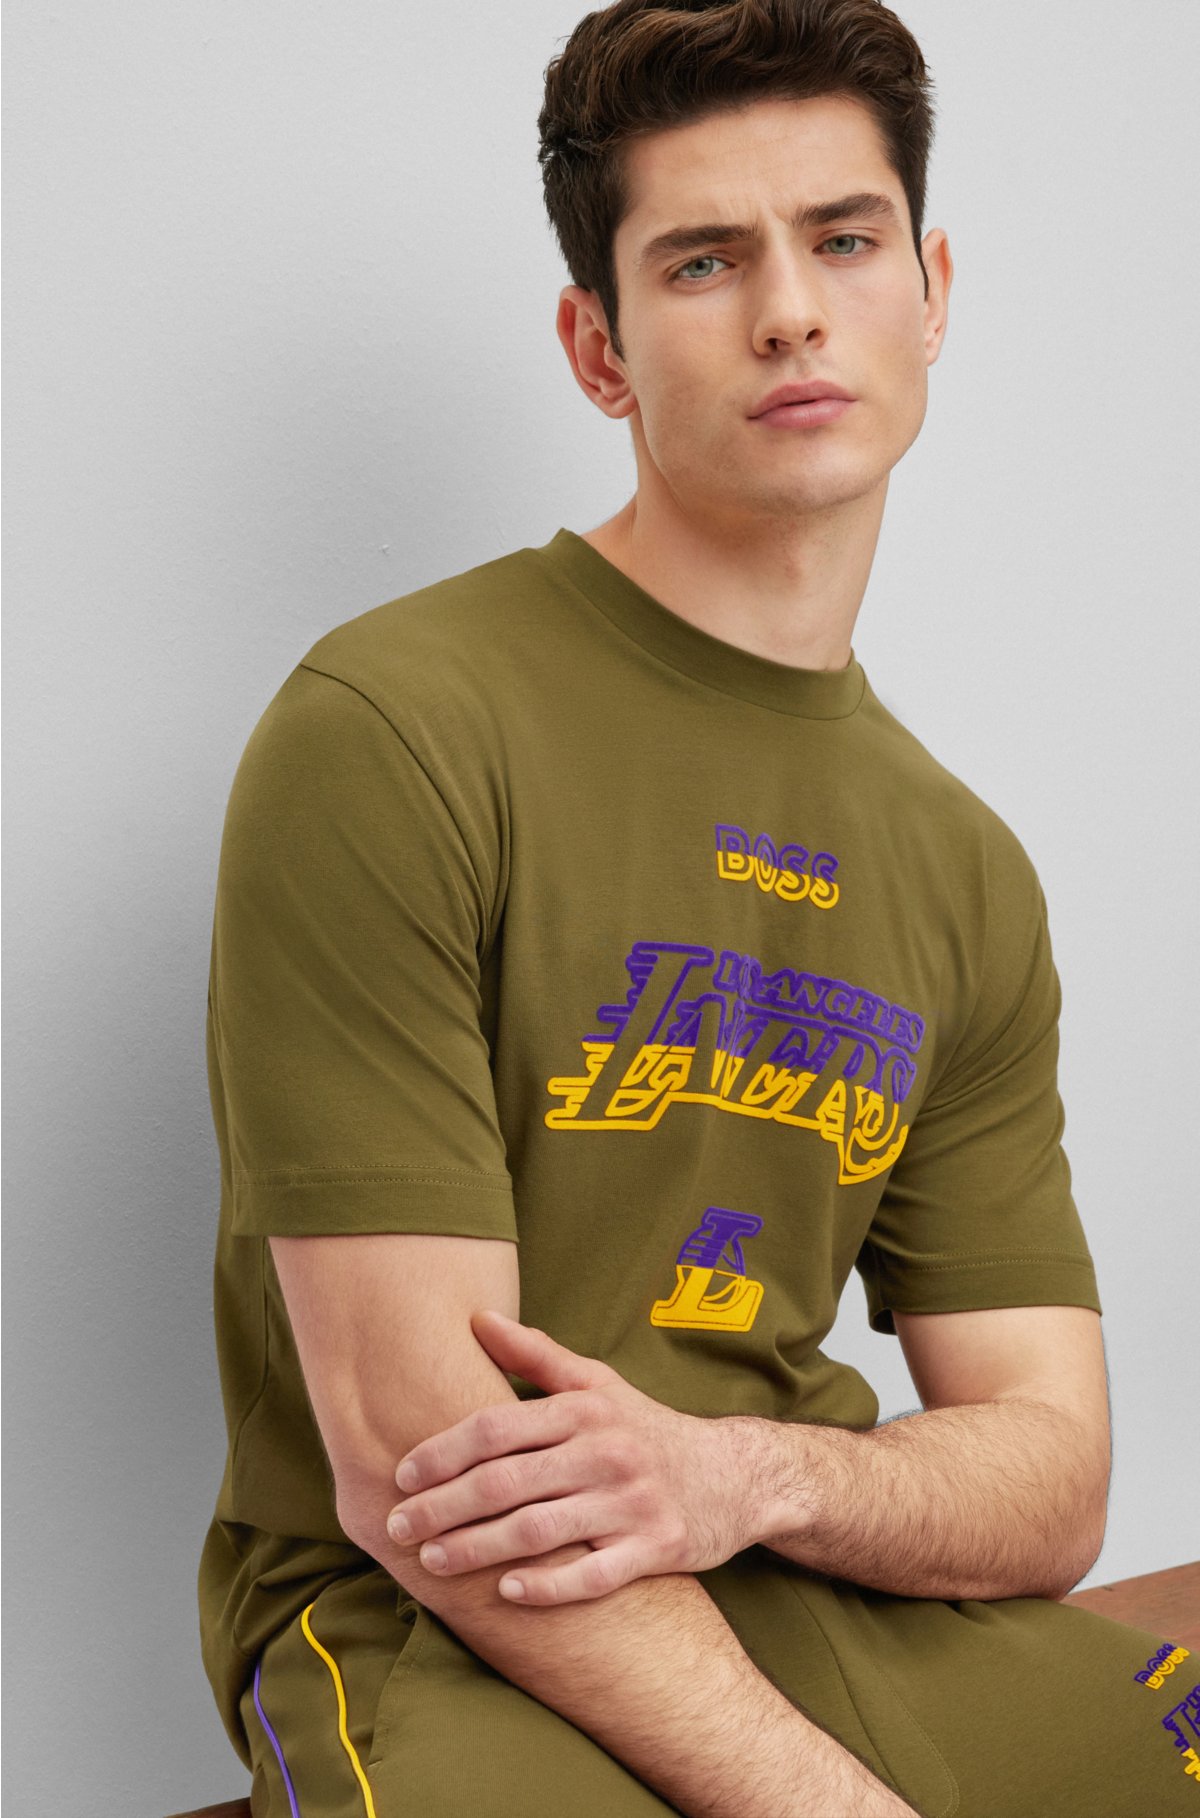 Buy Lakers Baby Boy Jersey online